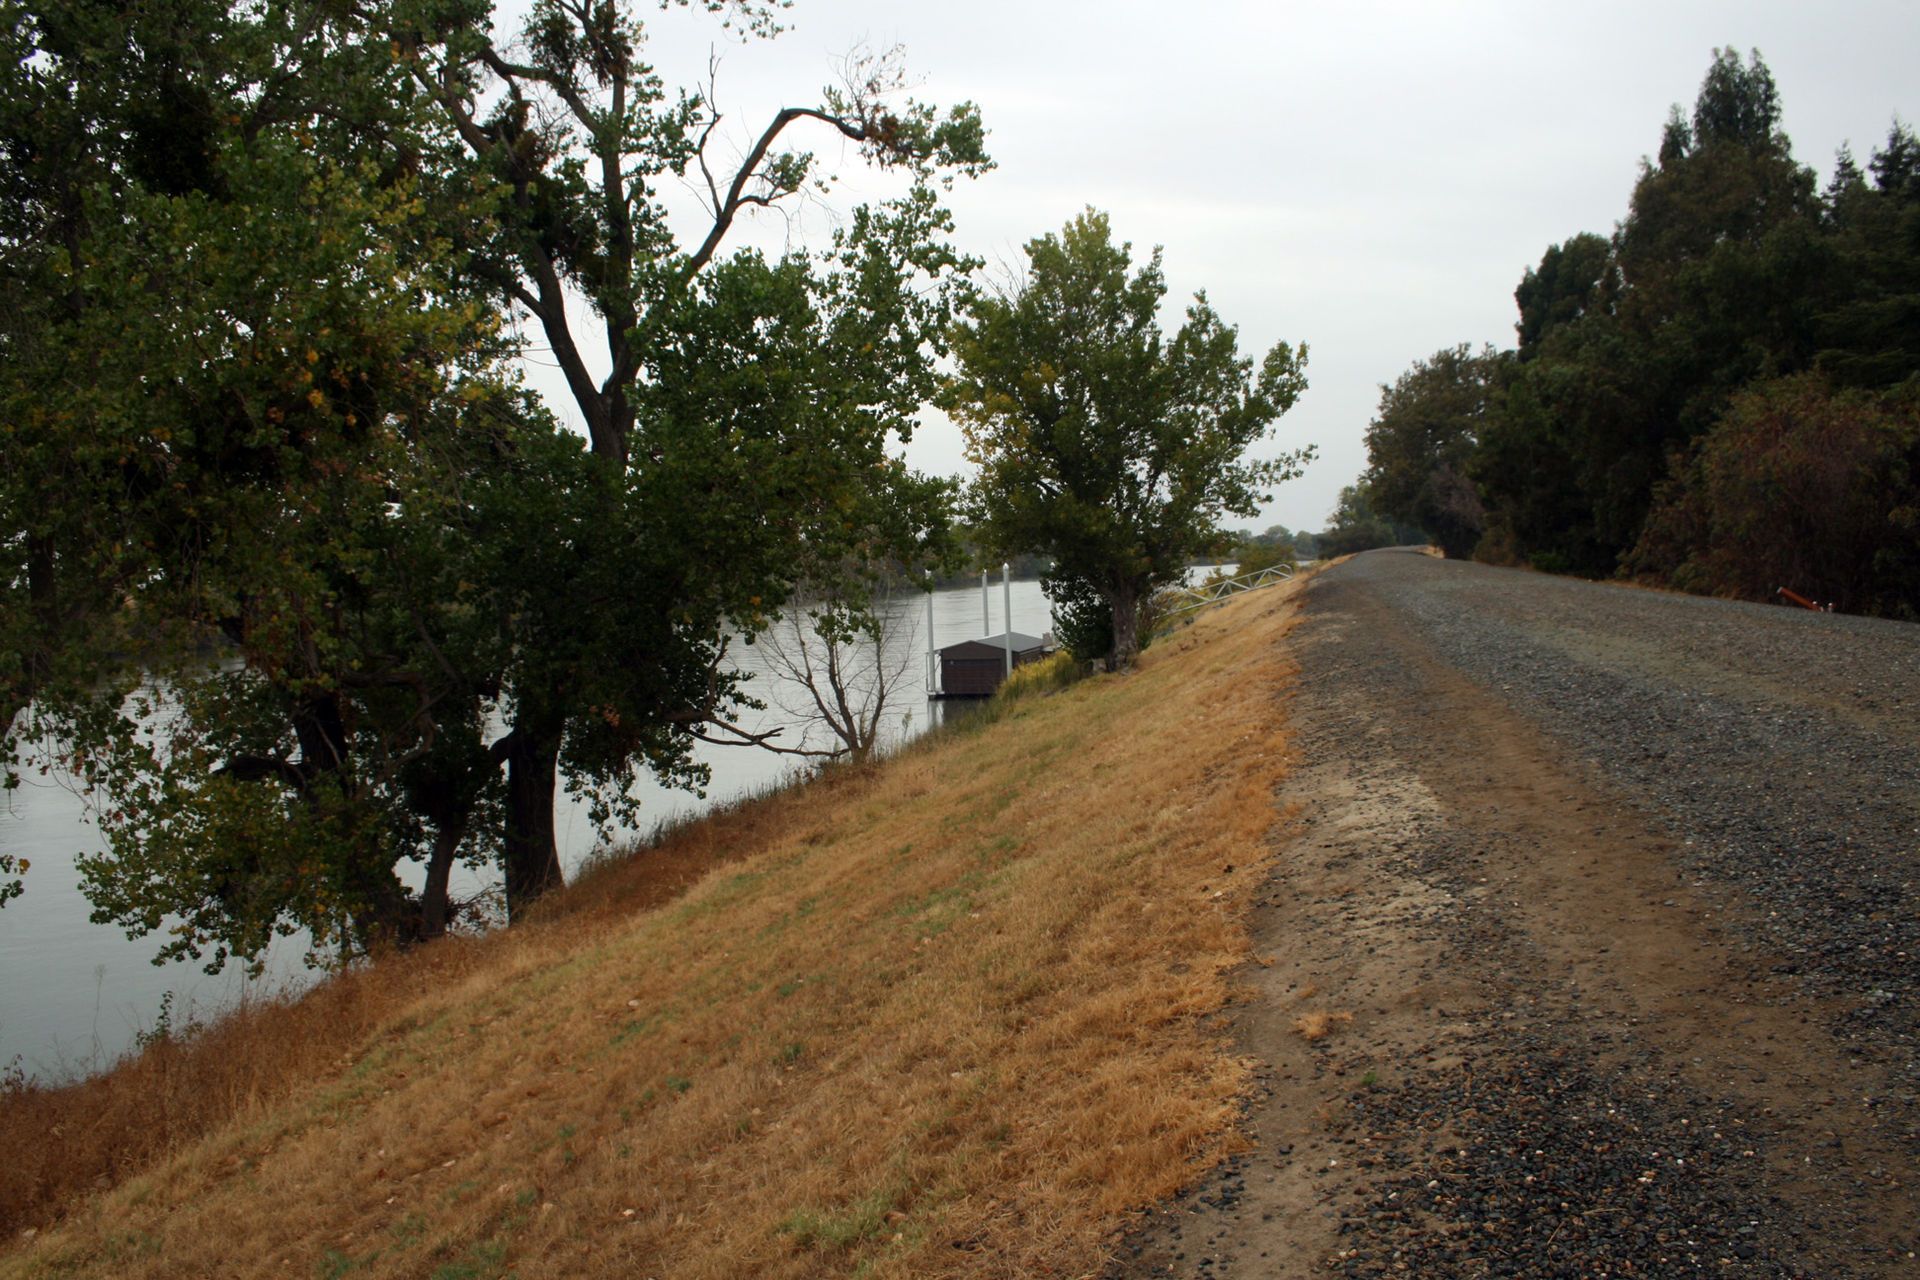 The side of a levee in Sacramento, California